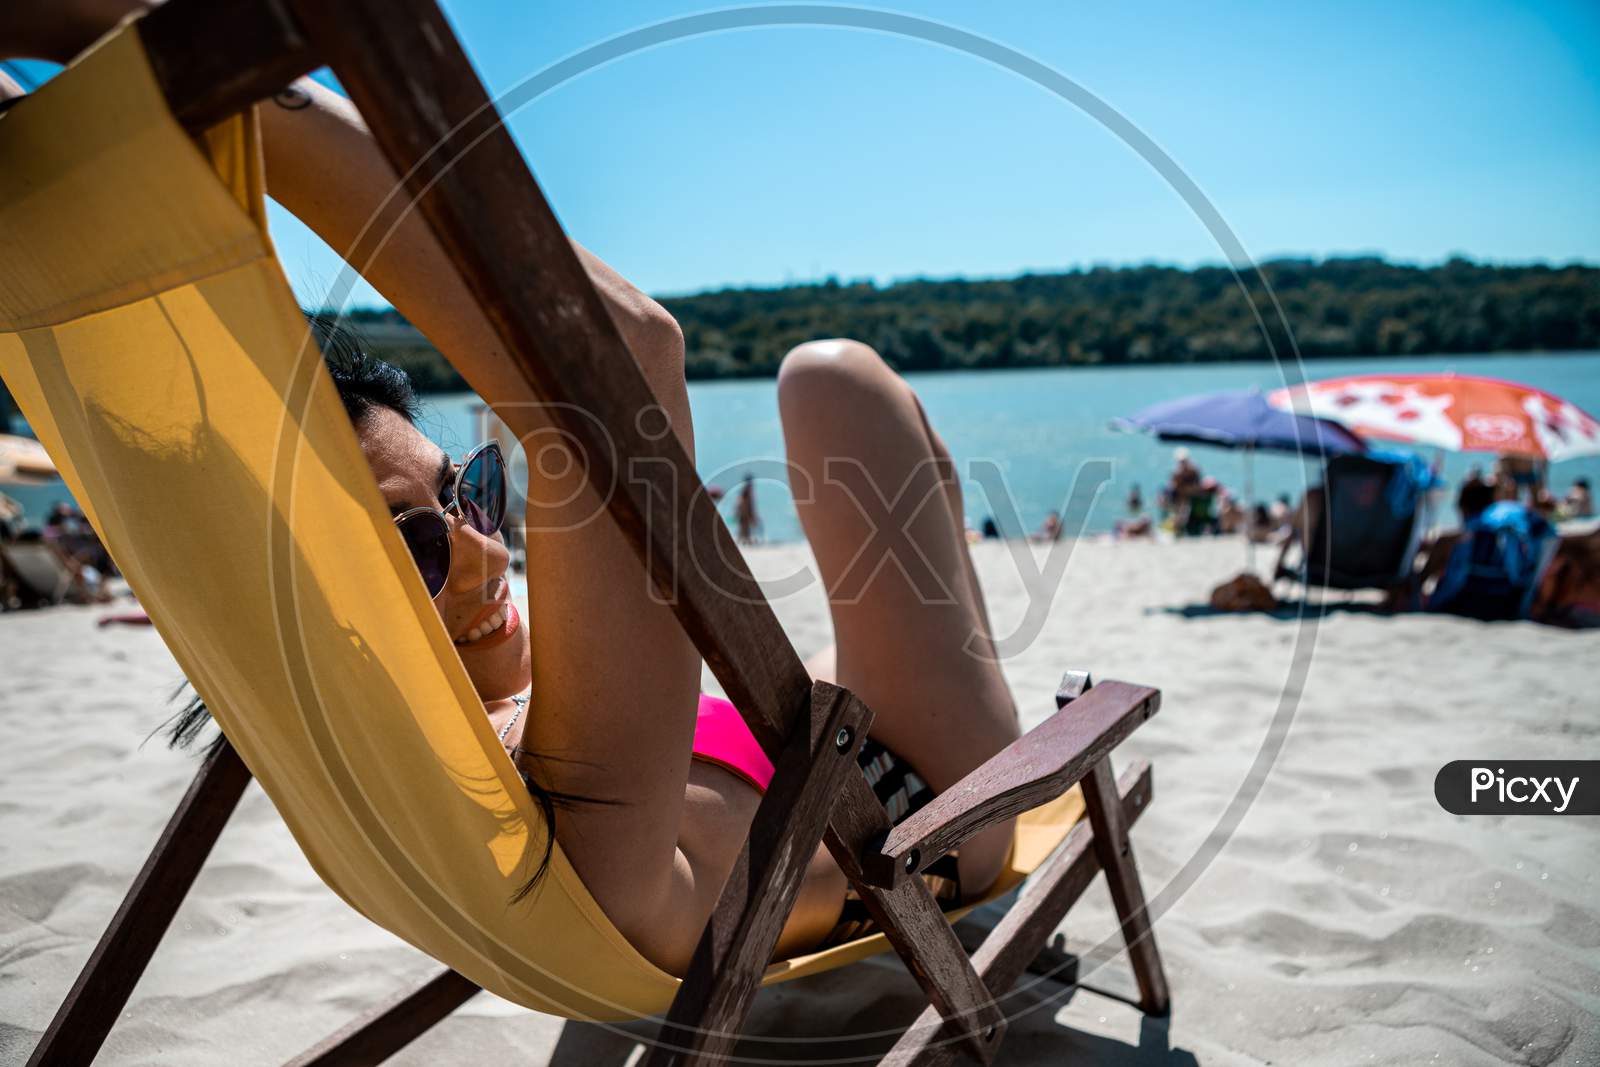 Selective Focus On The Face And Sunglasses Of An Attractive Young Woman Lying On A Yellow Deck Chair On A Beach Steam. The Beach Is Sandy And Located On The River Bank.